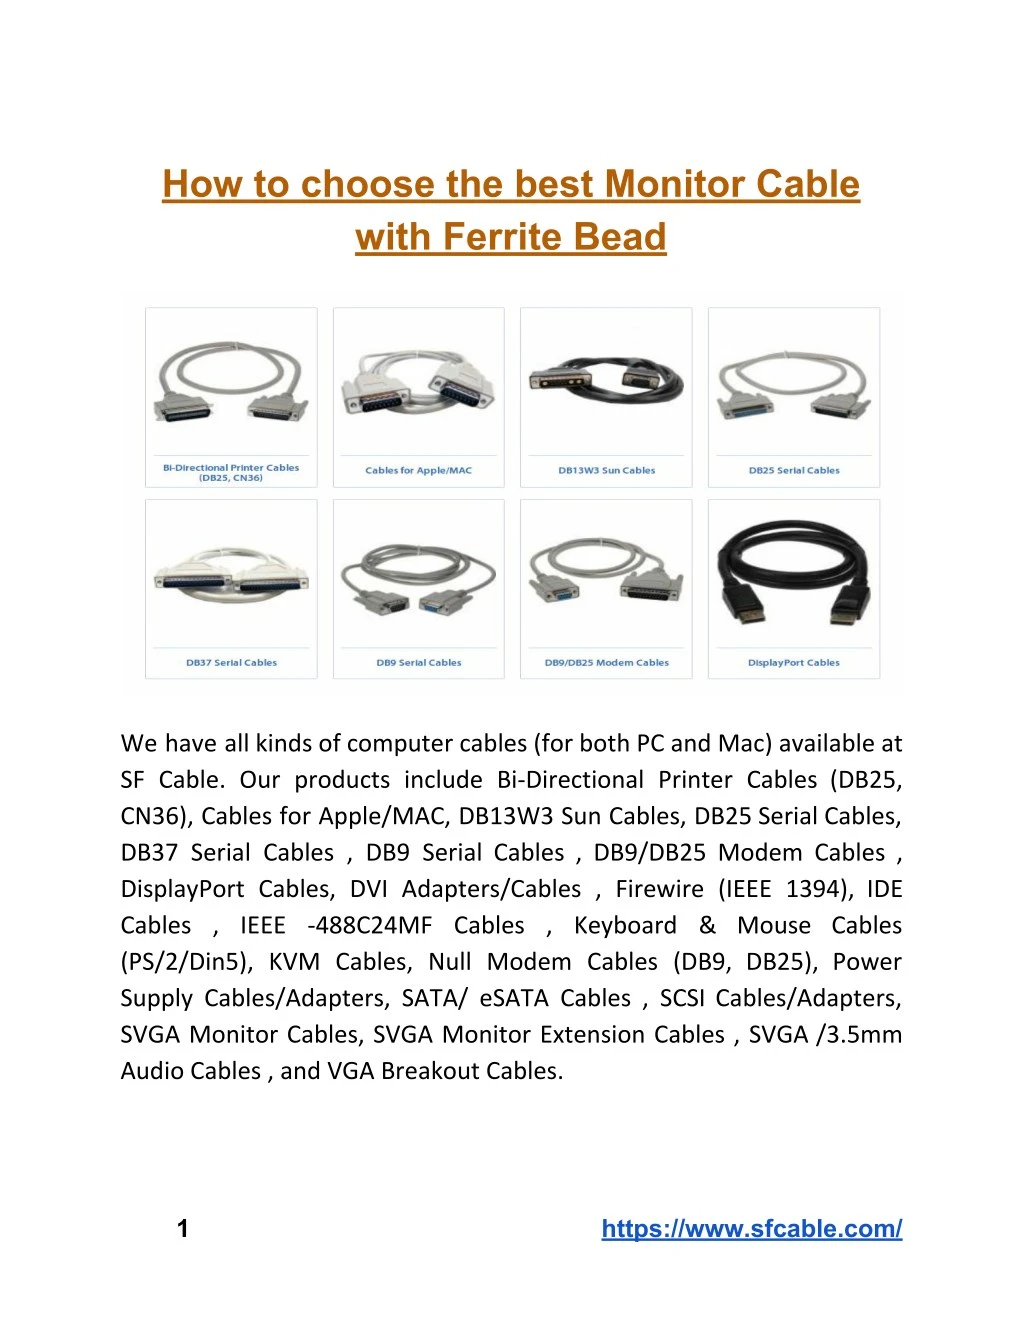 how to choose the best monitor cable with ferrite